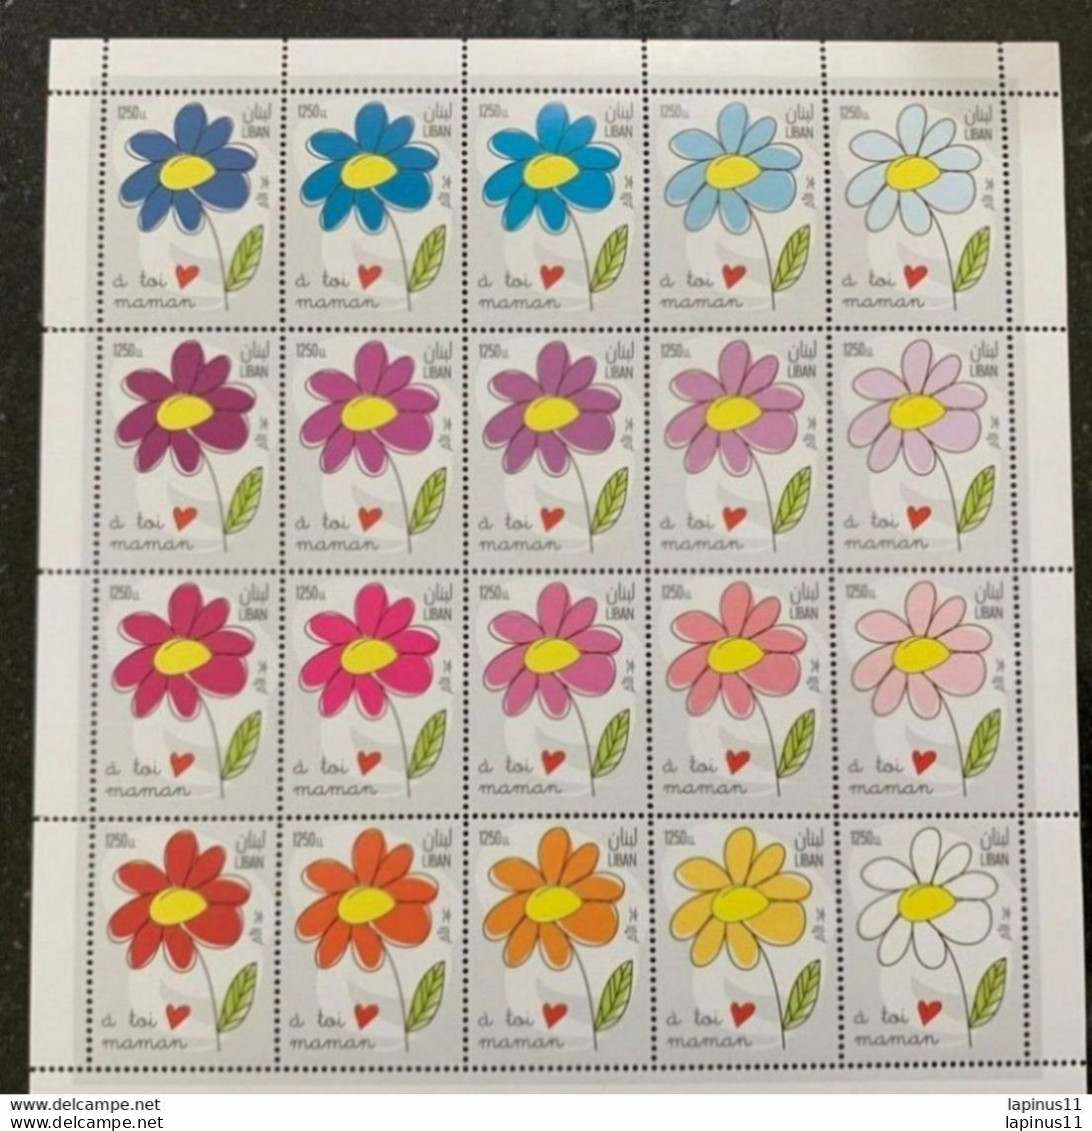 Lebanon Liban  2019 Mother’s Day 20 Different Stamps Only 1500 Issued Very RARE  And Limited - Lebanon